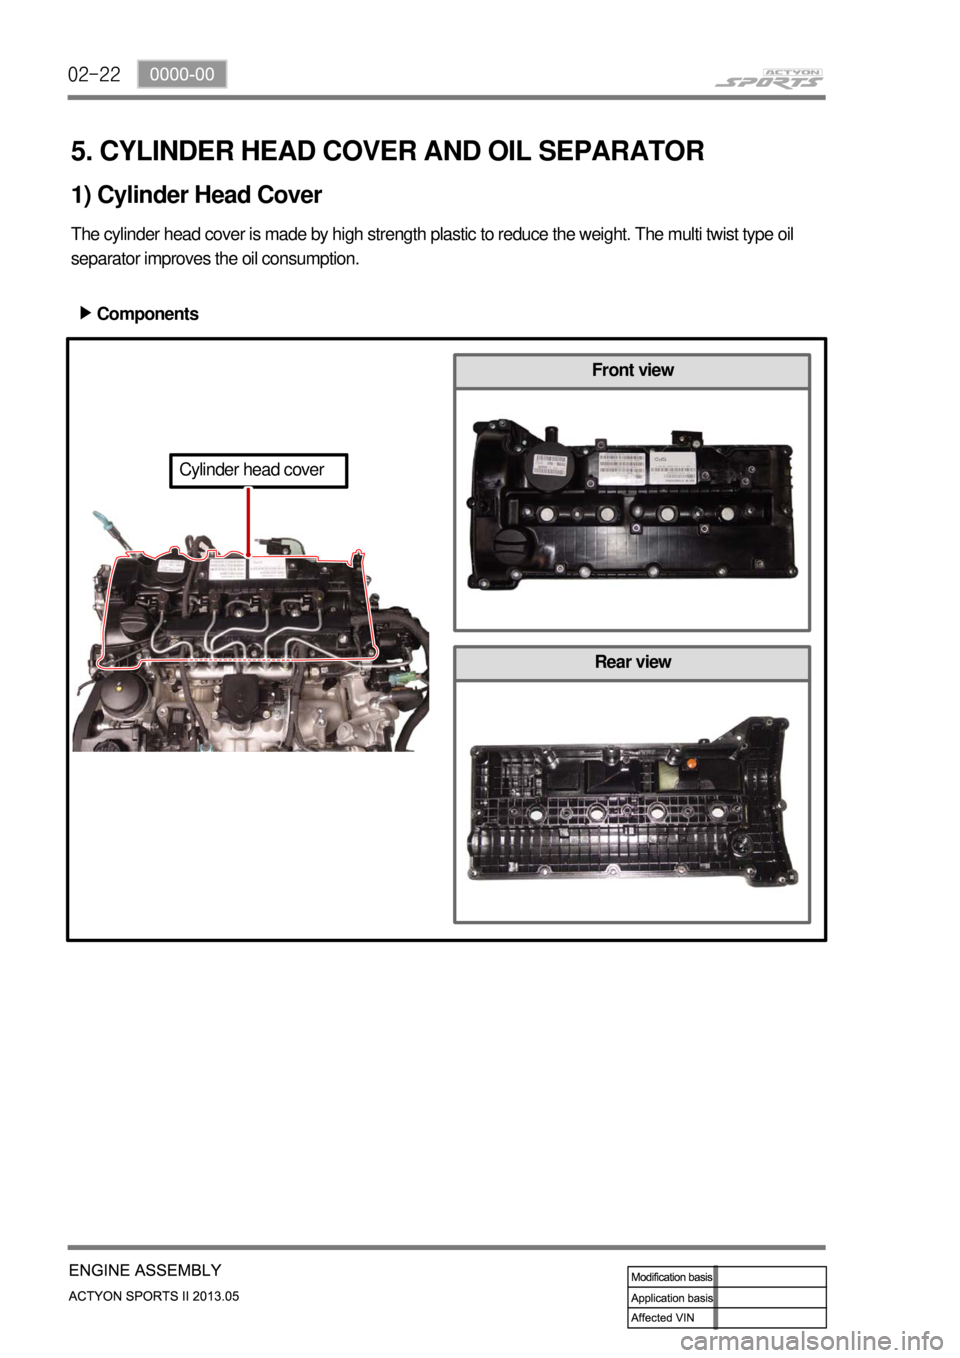 SSANGYONG NEW ACTYON SPORTS 2013  Service Manual 02-22
Rear view
5. CYLINDER HEAD COVER AND OIL SEPARATOR
The cylinder head cover is made by high strength plastic to reduce the weight. The multi twist type oil 
separator improves the oil consumption